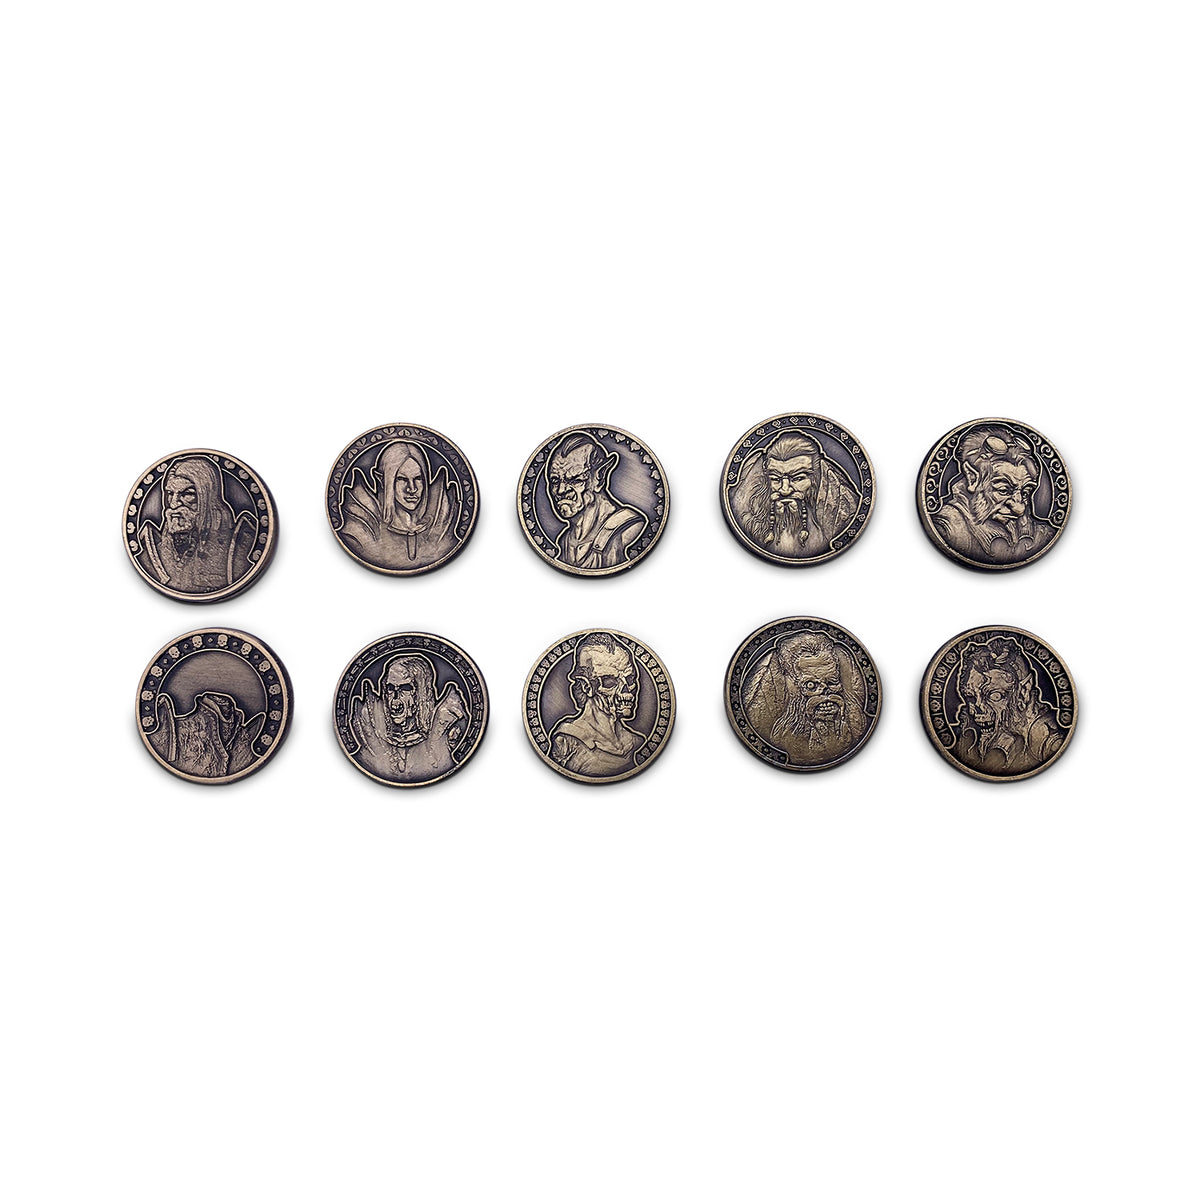 Adventure Coins - Life or Death Coins Set of 10